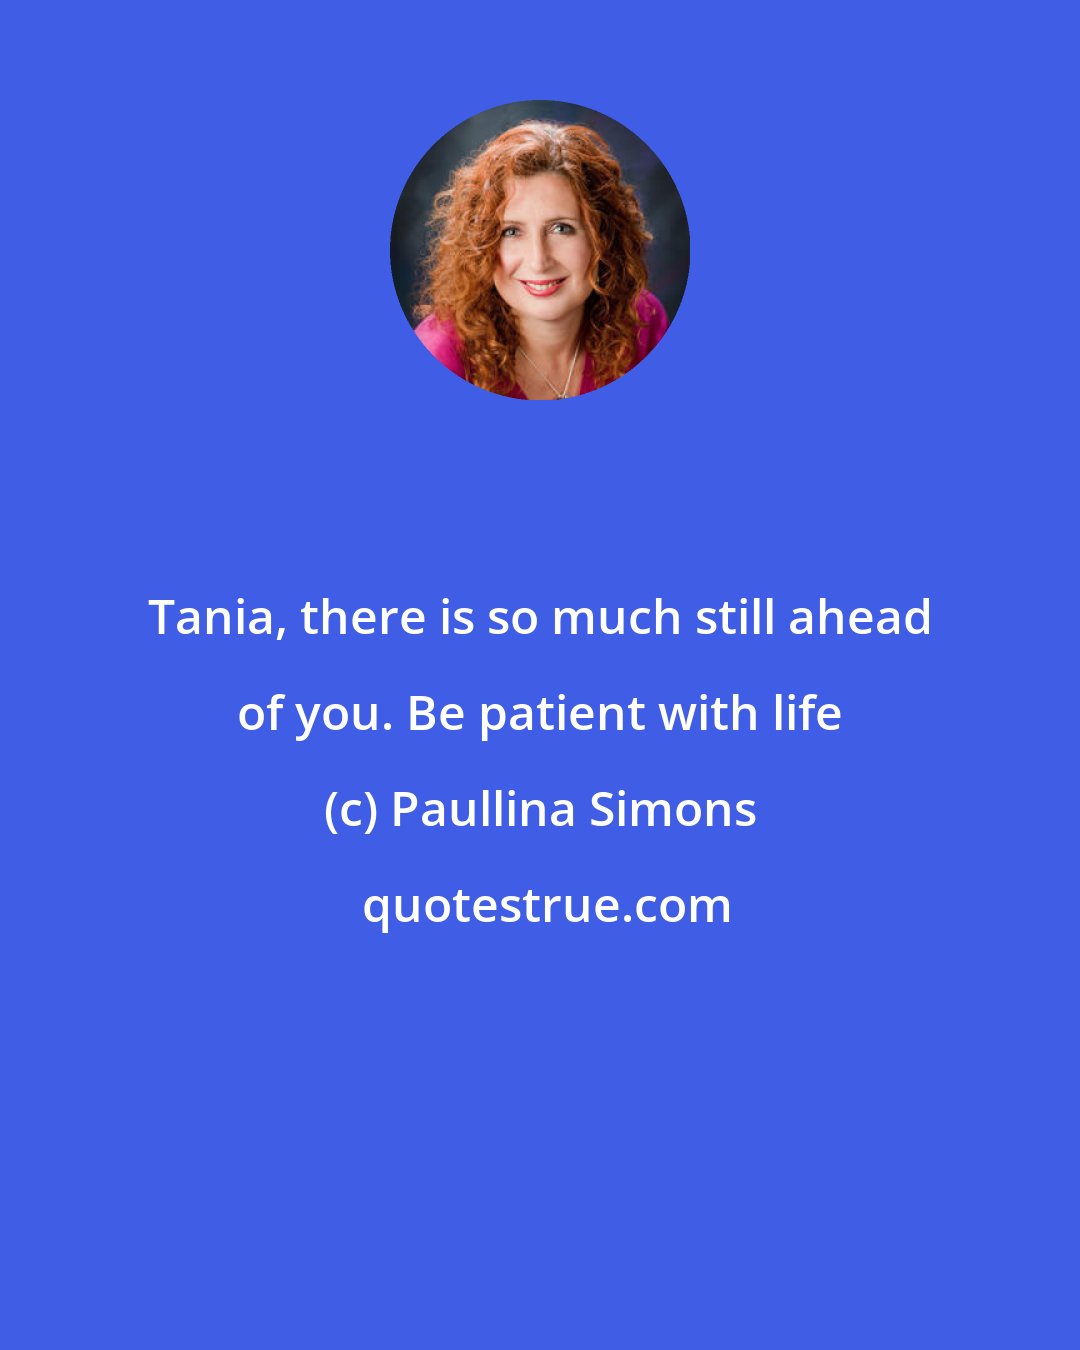 Paullina Simons: Tania, there is so much still ahead of you. Be patient with life